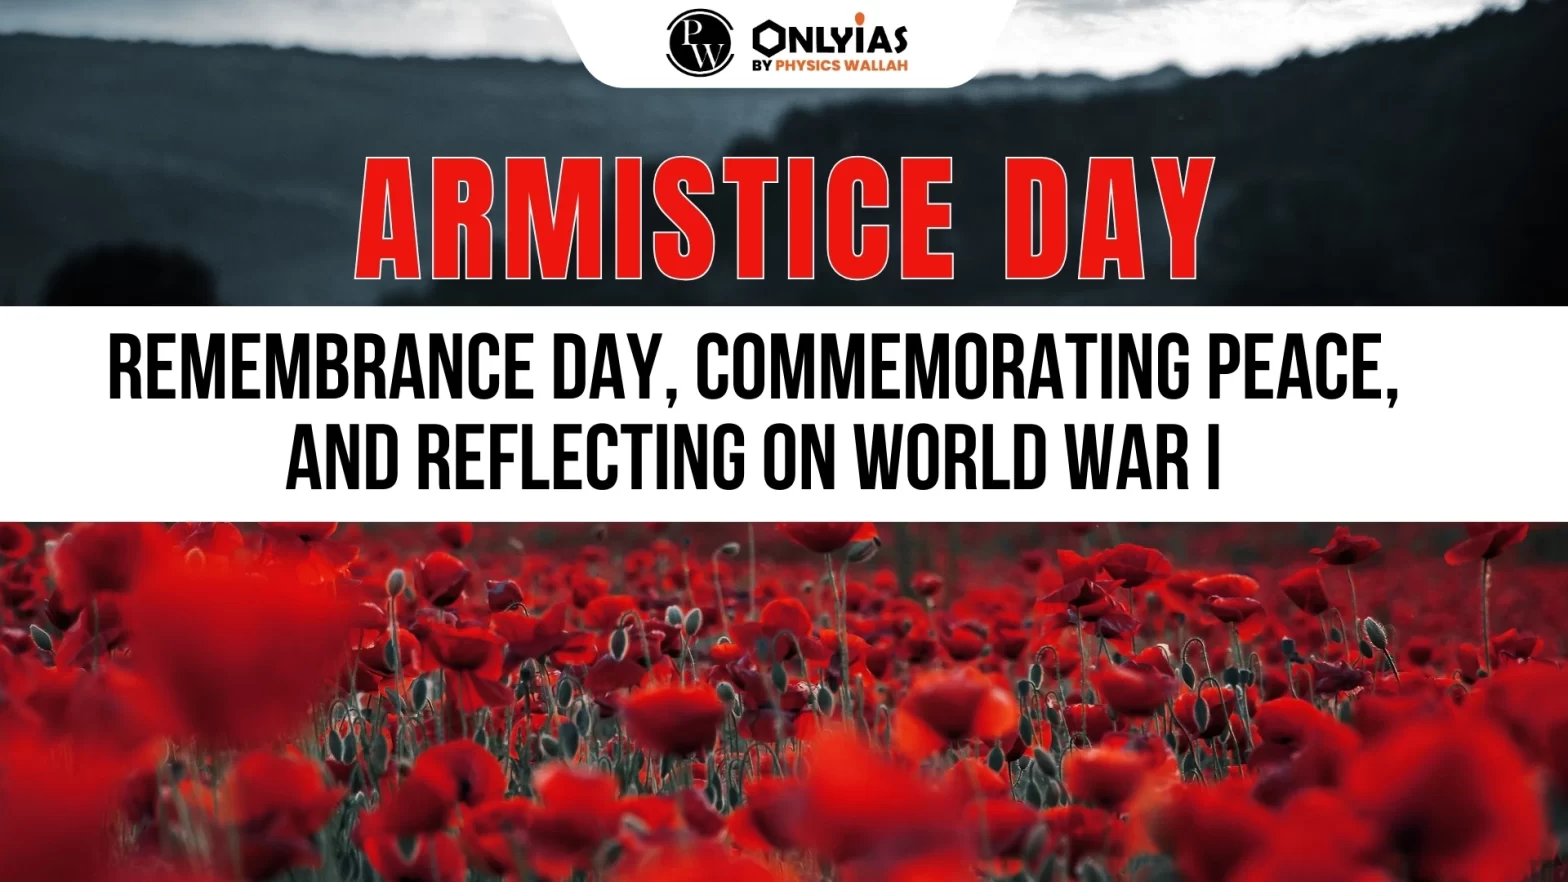 Armistice Day – Remembrance Day, Commemorating Peace, and Reflecting on World War I